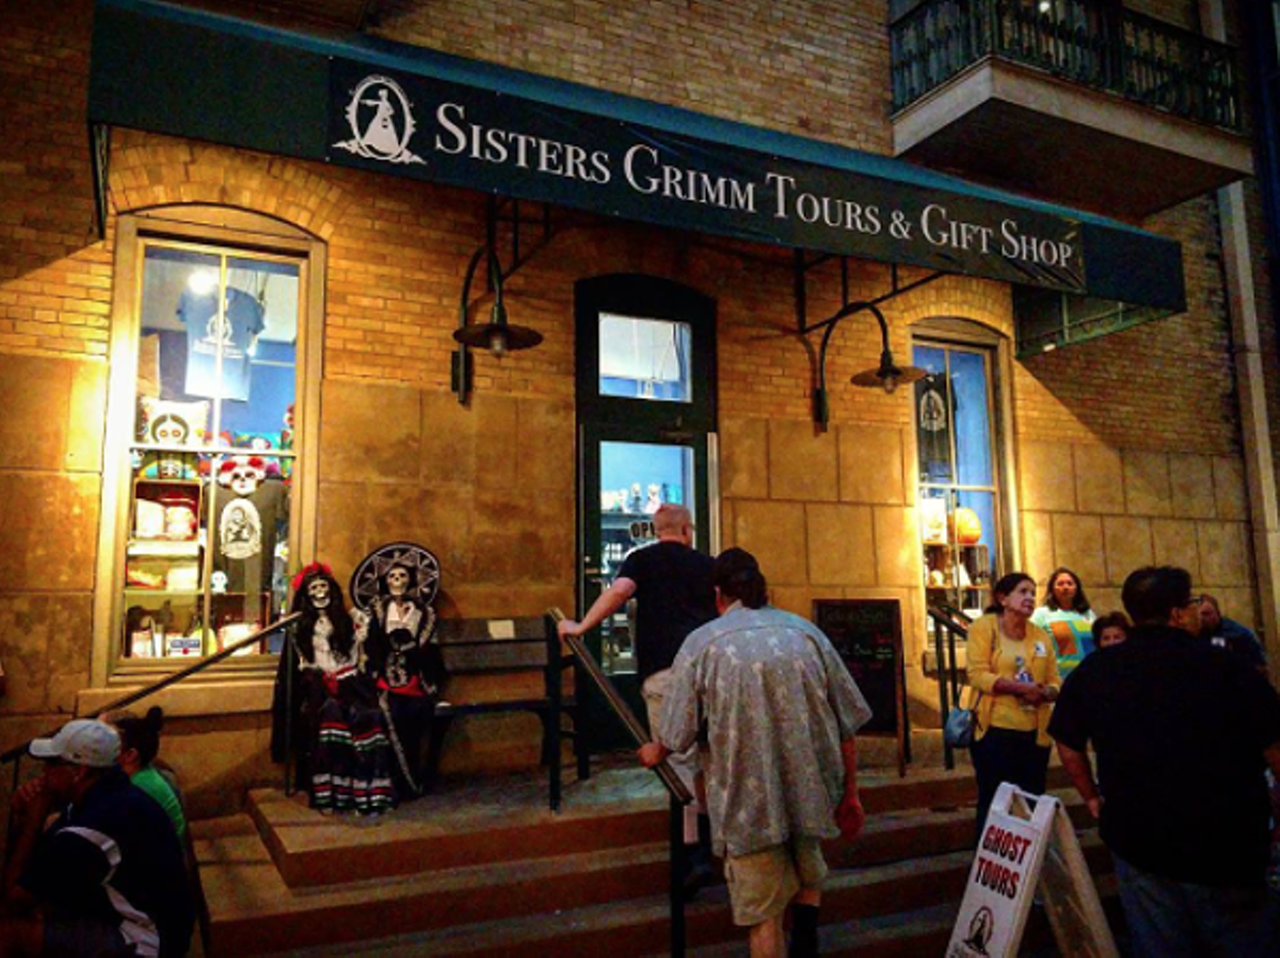 Fri 10/20-Sat 10/21, All Hallow's Eve Dinner and Ghost Tour at the Haunted Menger Hotel
There’s plenty of ghost tours in San Antonio to choose from, but Sisters Grimm is arguably the best one. After enjoying a literal feast (three courses and all) in the haunted Colonial Room Restaurant, you’ll explore the hauntings within the historic Menger Hotel and downtown San Antonio. $59-$79, 6:30-10pm, Menger Hotel, 204 Alamo Plaza, (210) 638-1338, sistersgrimmghosttour.com.